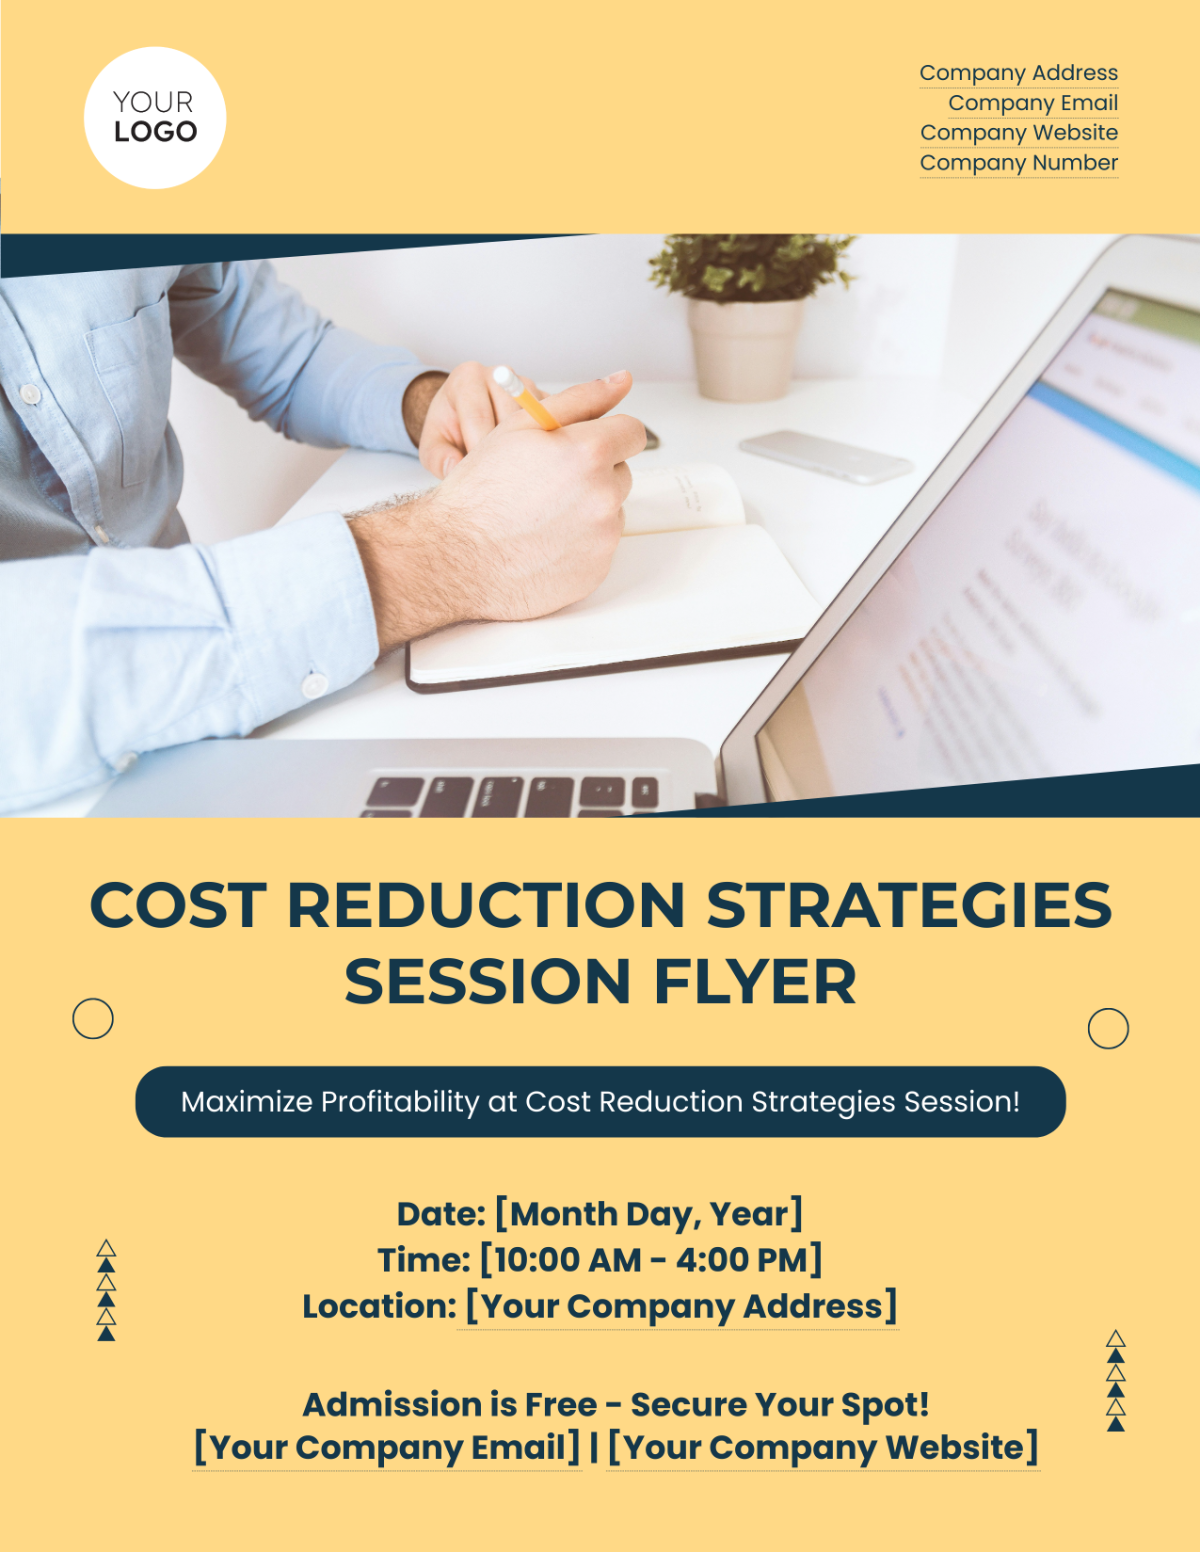 Cost Reduction Strategies Session Flyer Template